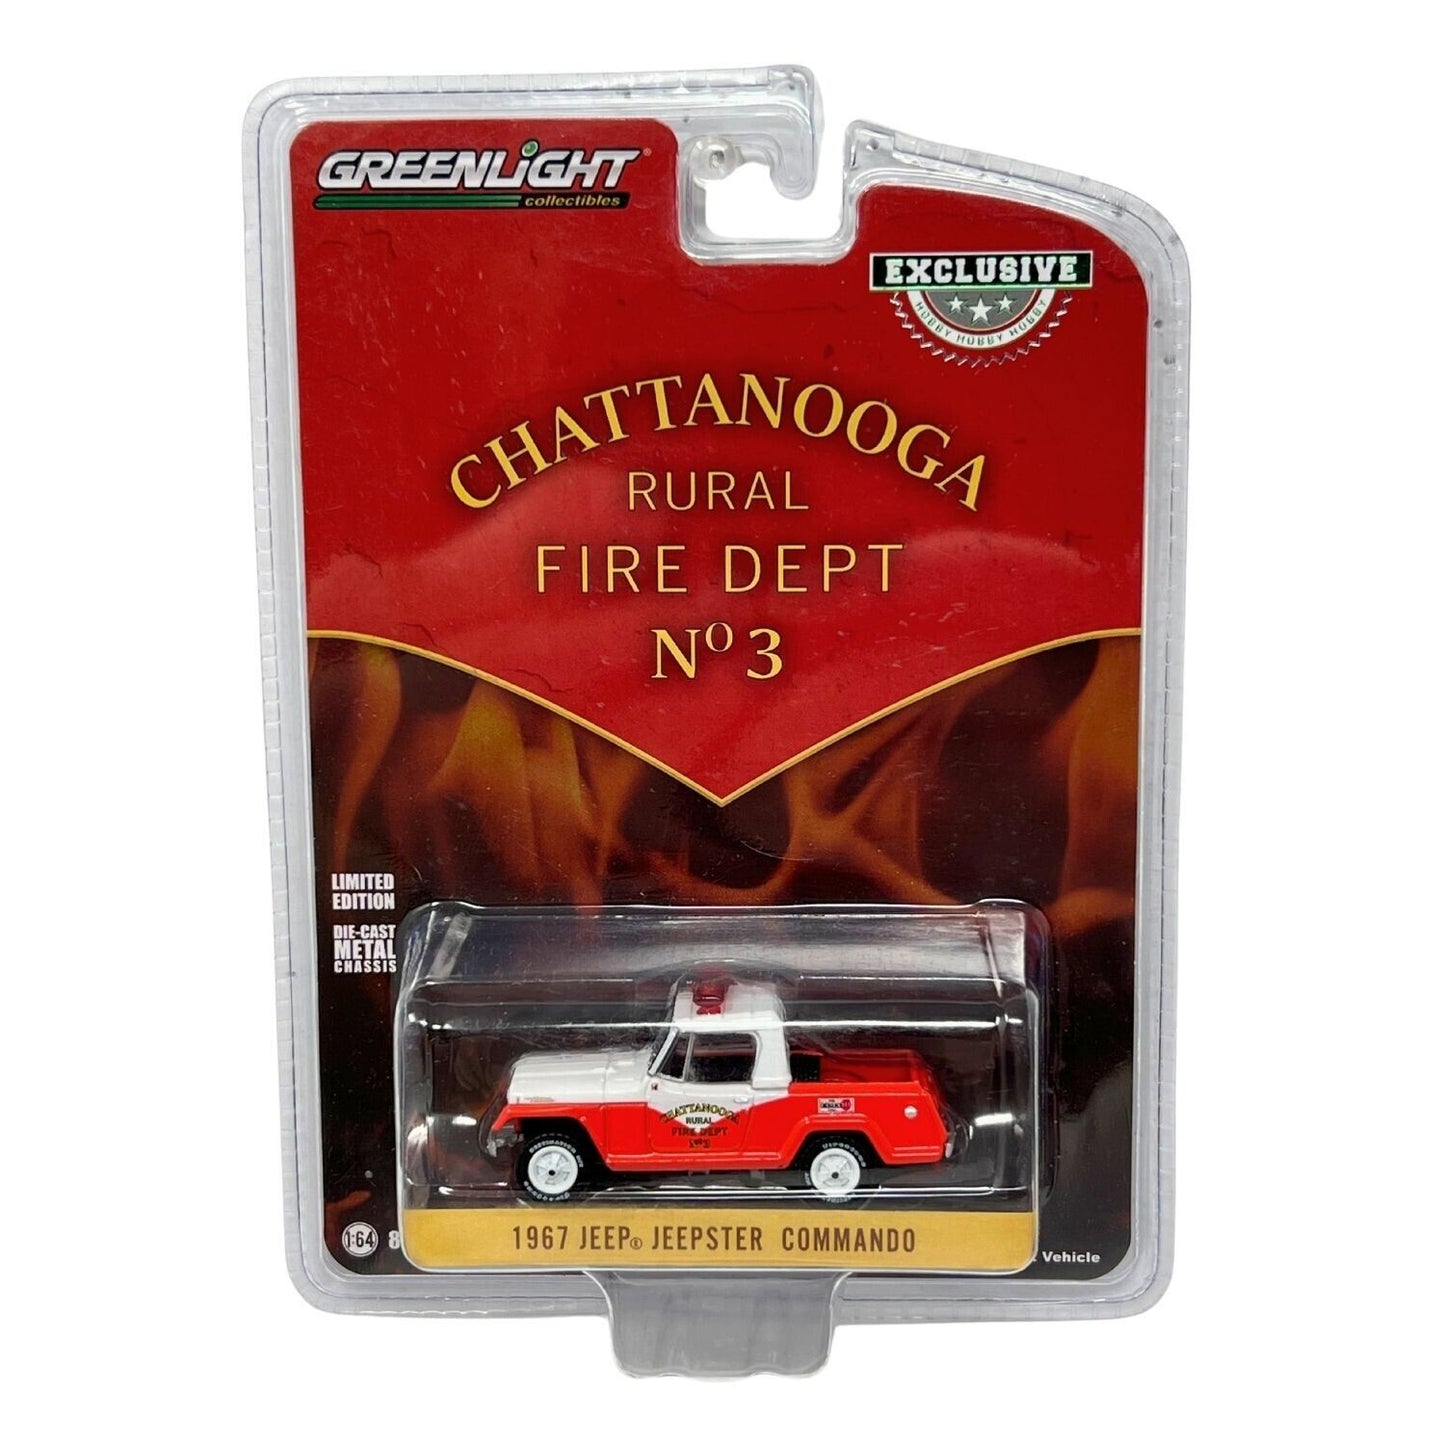 Greenlight Chattanooga Fire Dept. 1967 Jeep Jeepster Commando 1:64 Diecast